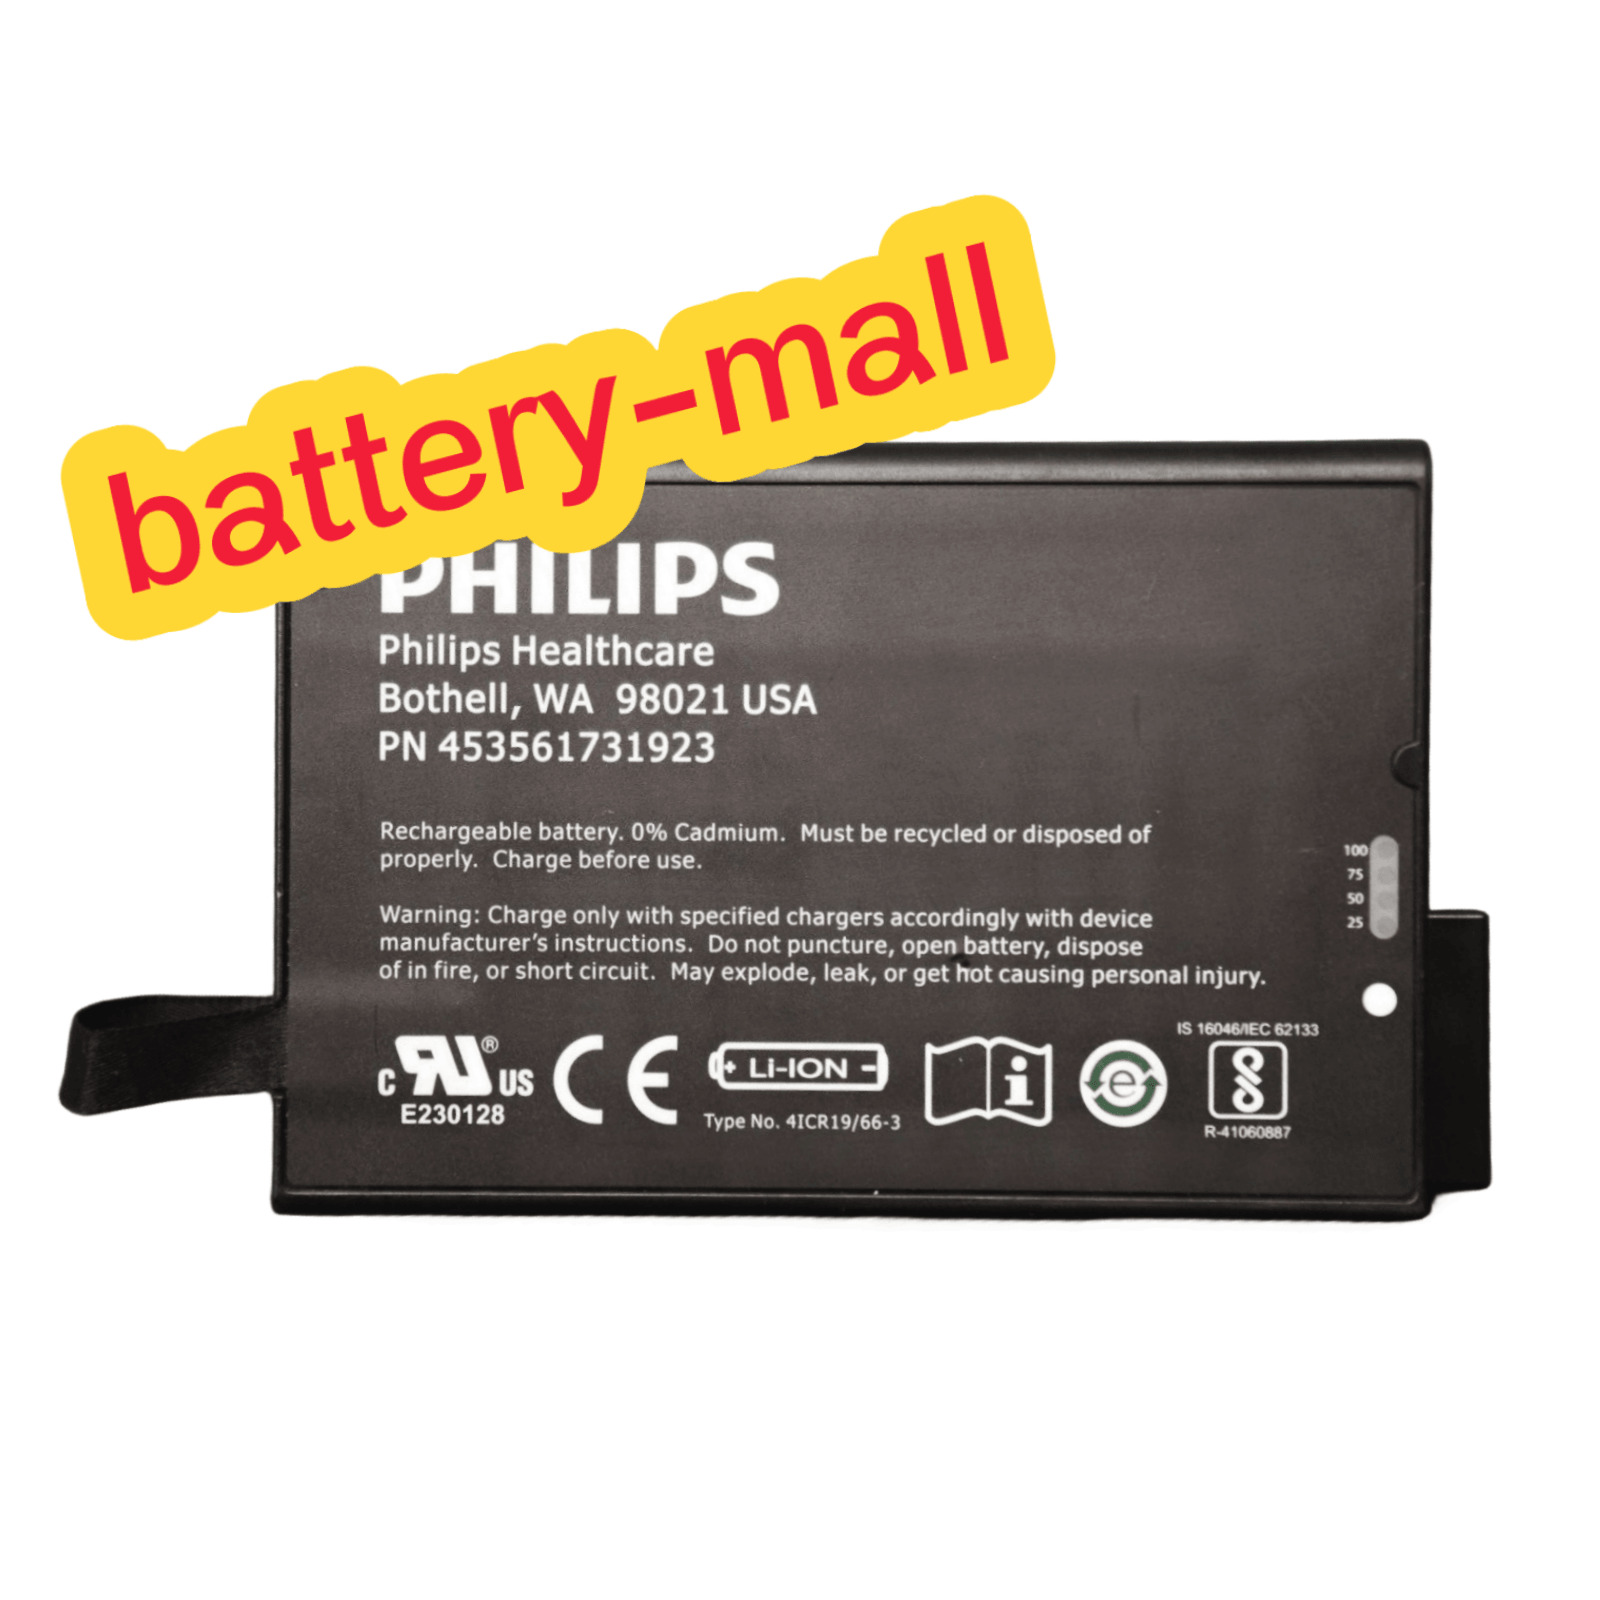 New Genuine PN 453561731923 for Philips WA 98021 Healthcare Battery 41CR19/66-3